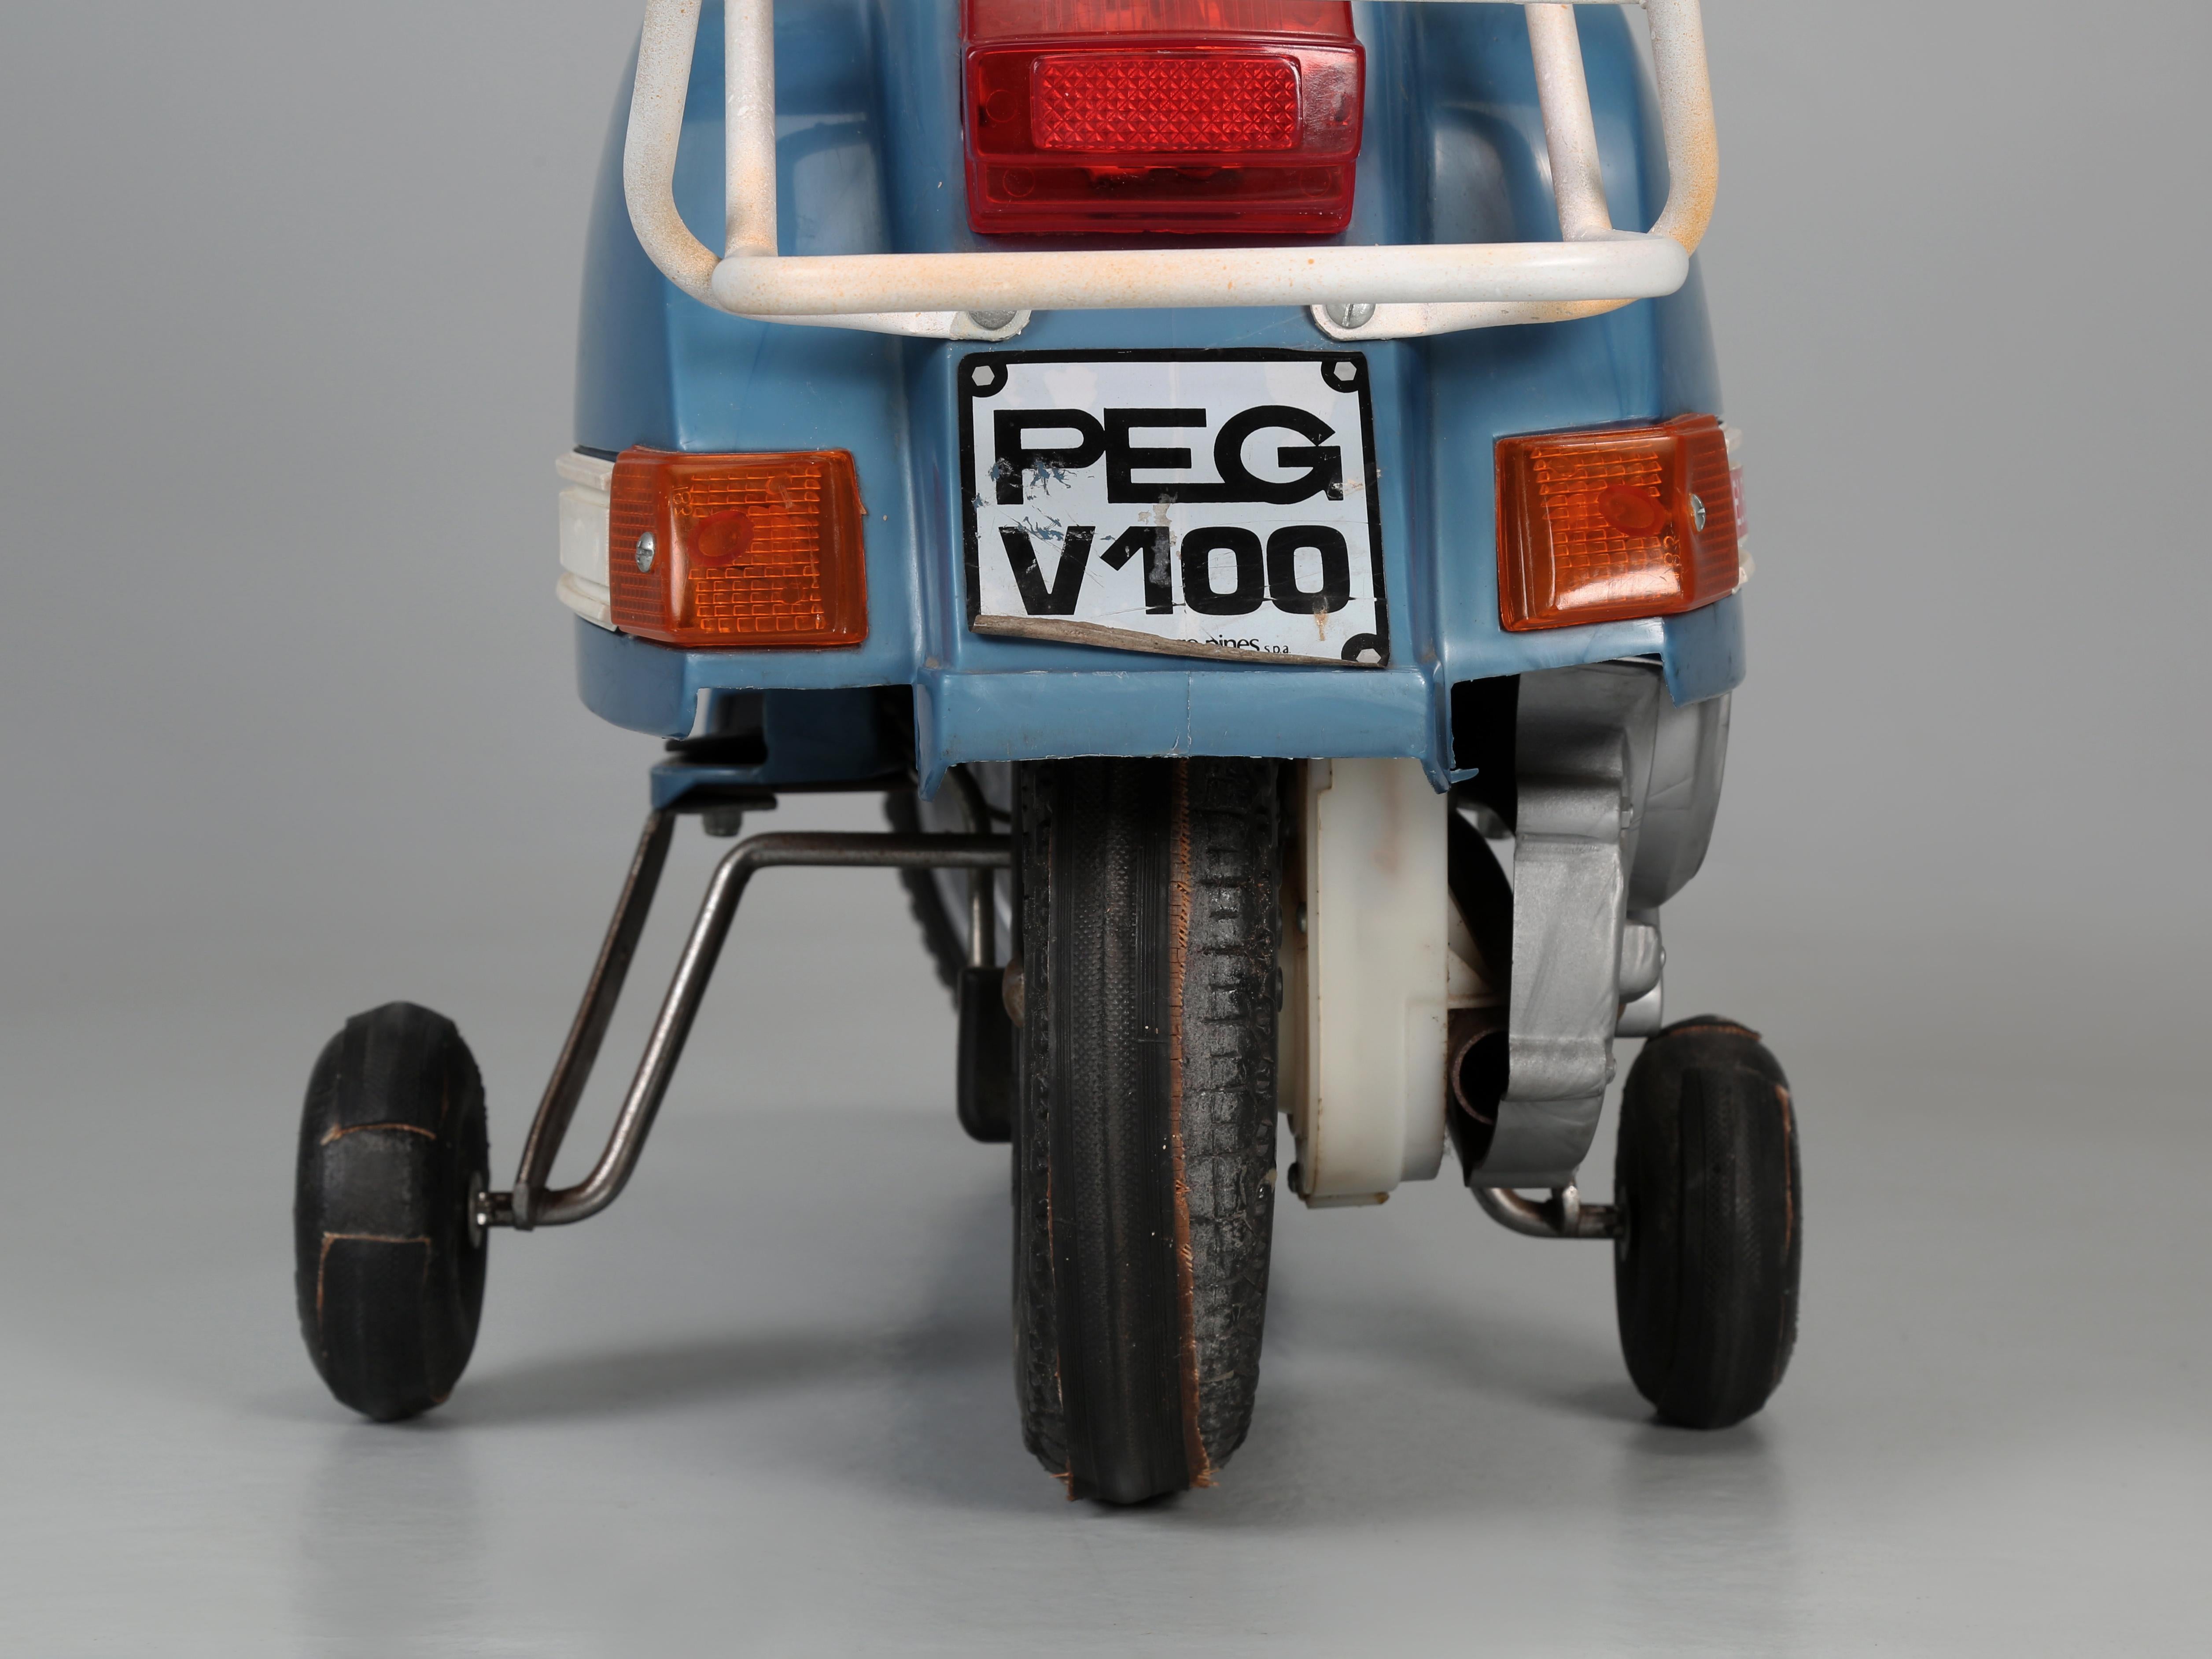 Child's Battery Operated Vespa Scooter Made in Italy by Peg Perego for Ages 3-Up 6